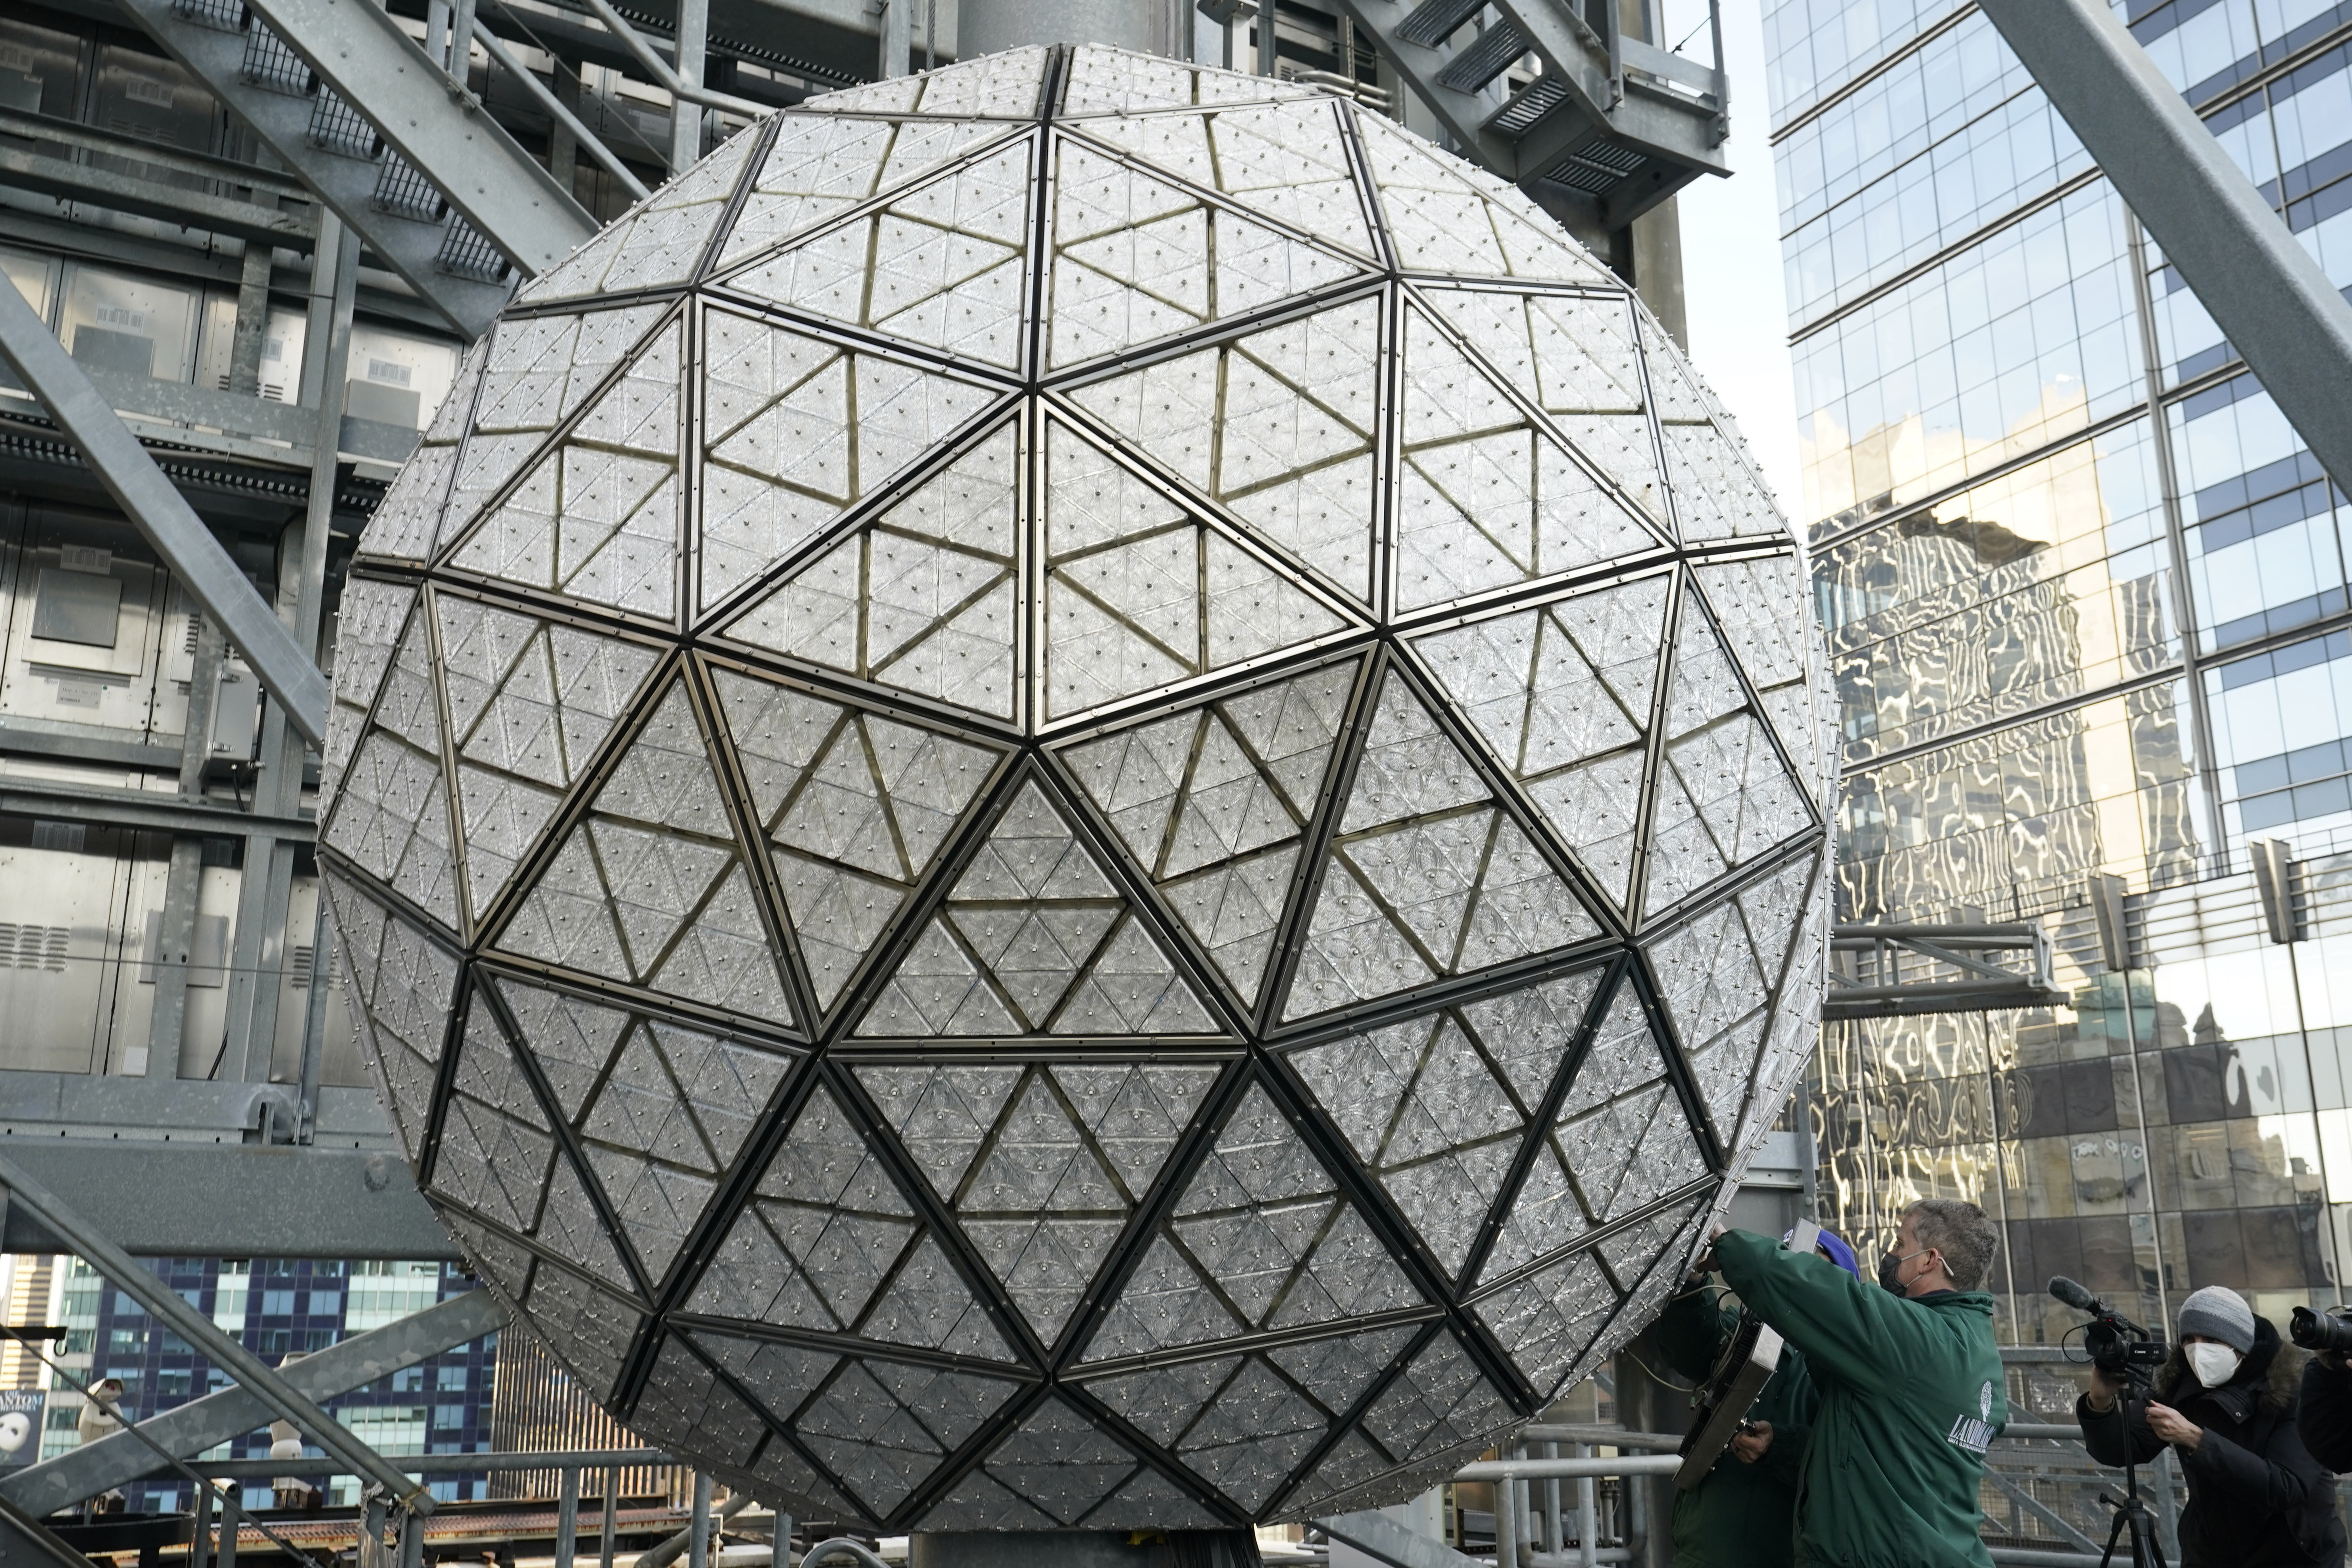 LIVE STREAM 2021 New Years Eve Times Square Ball Drop coverage